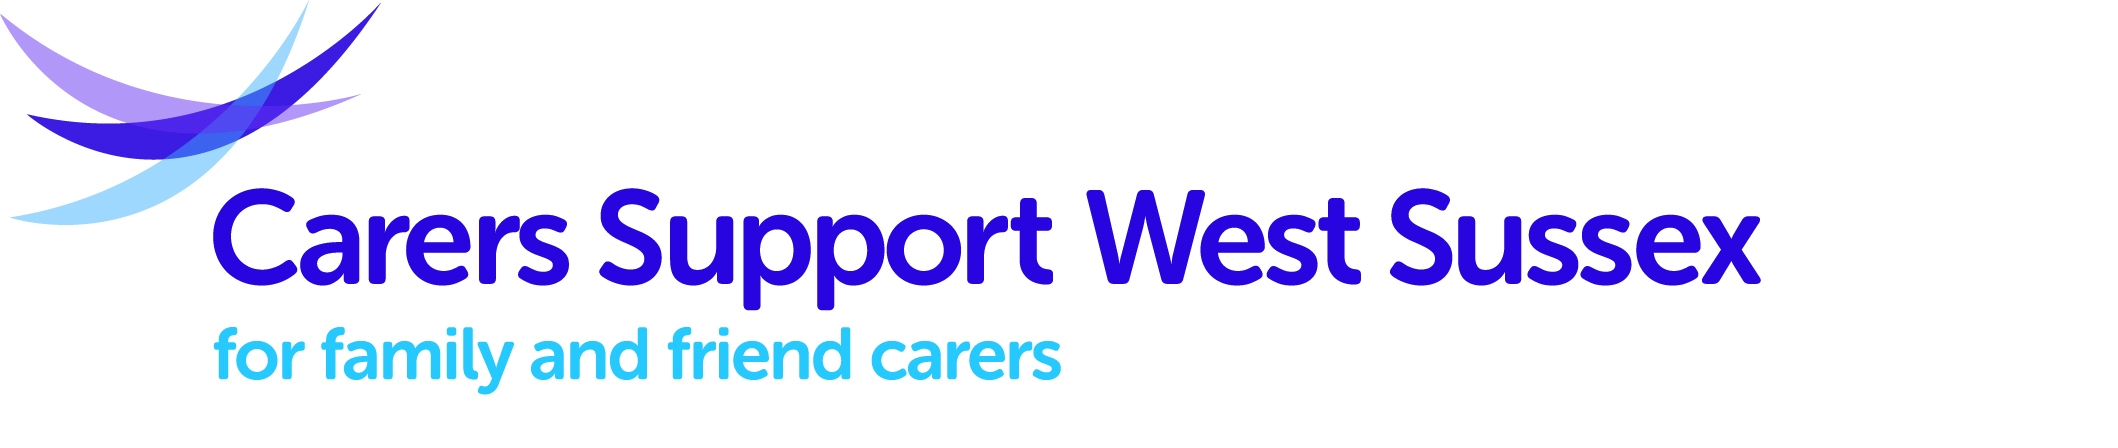 Carers Support West Sussex Logo